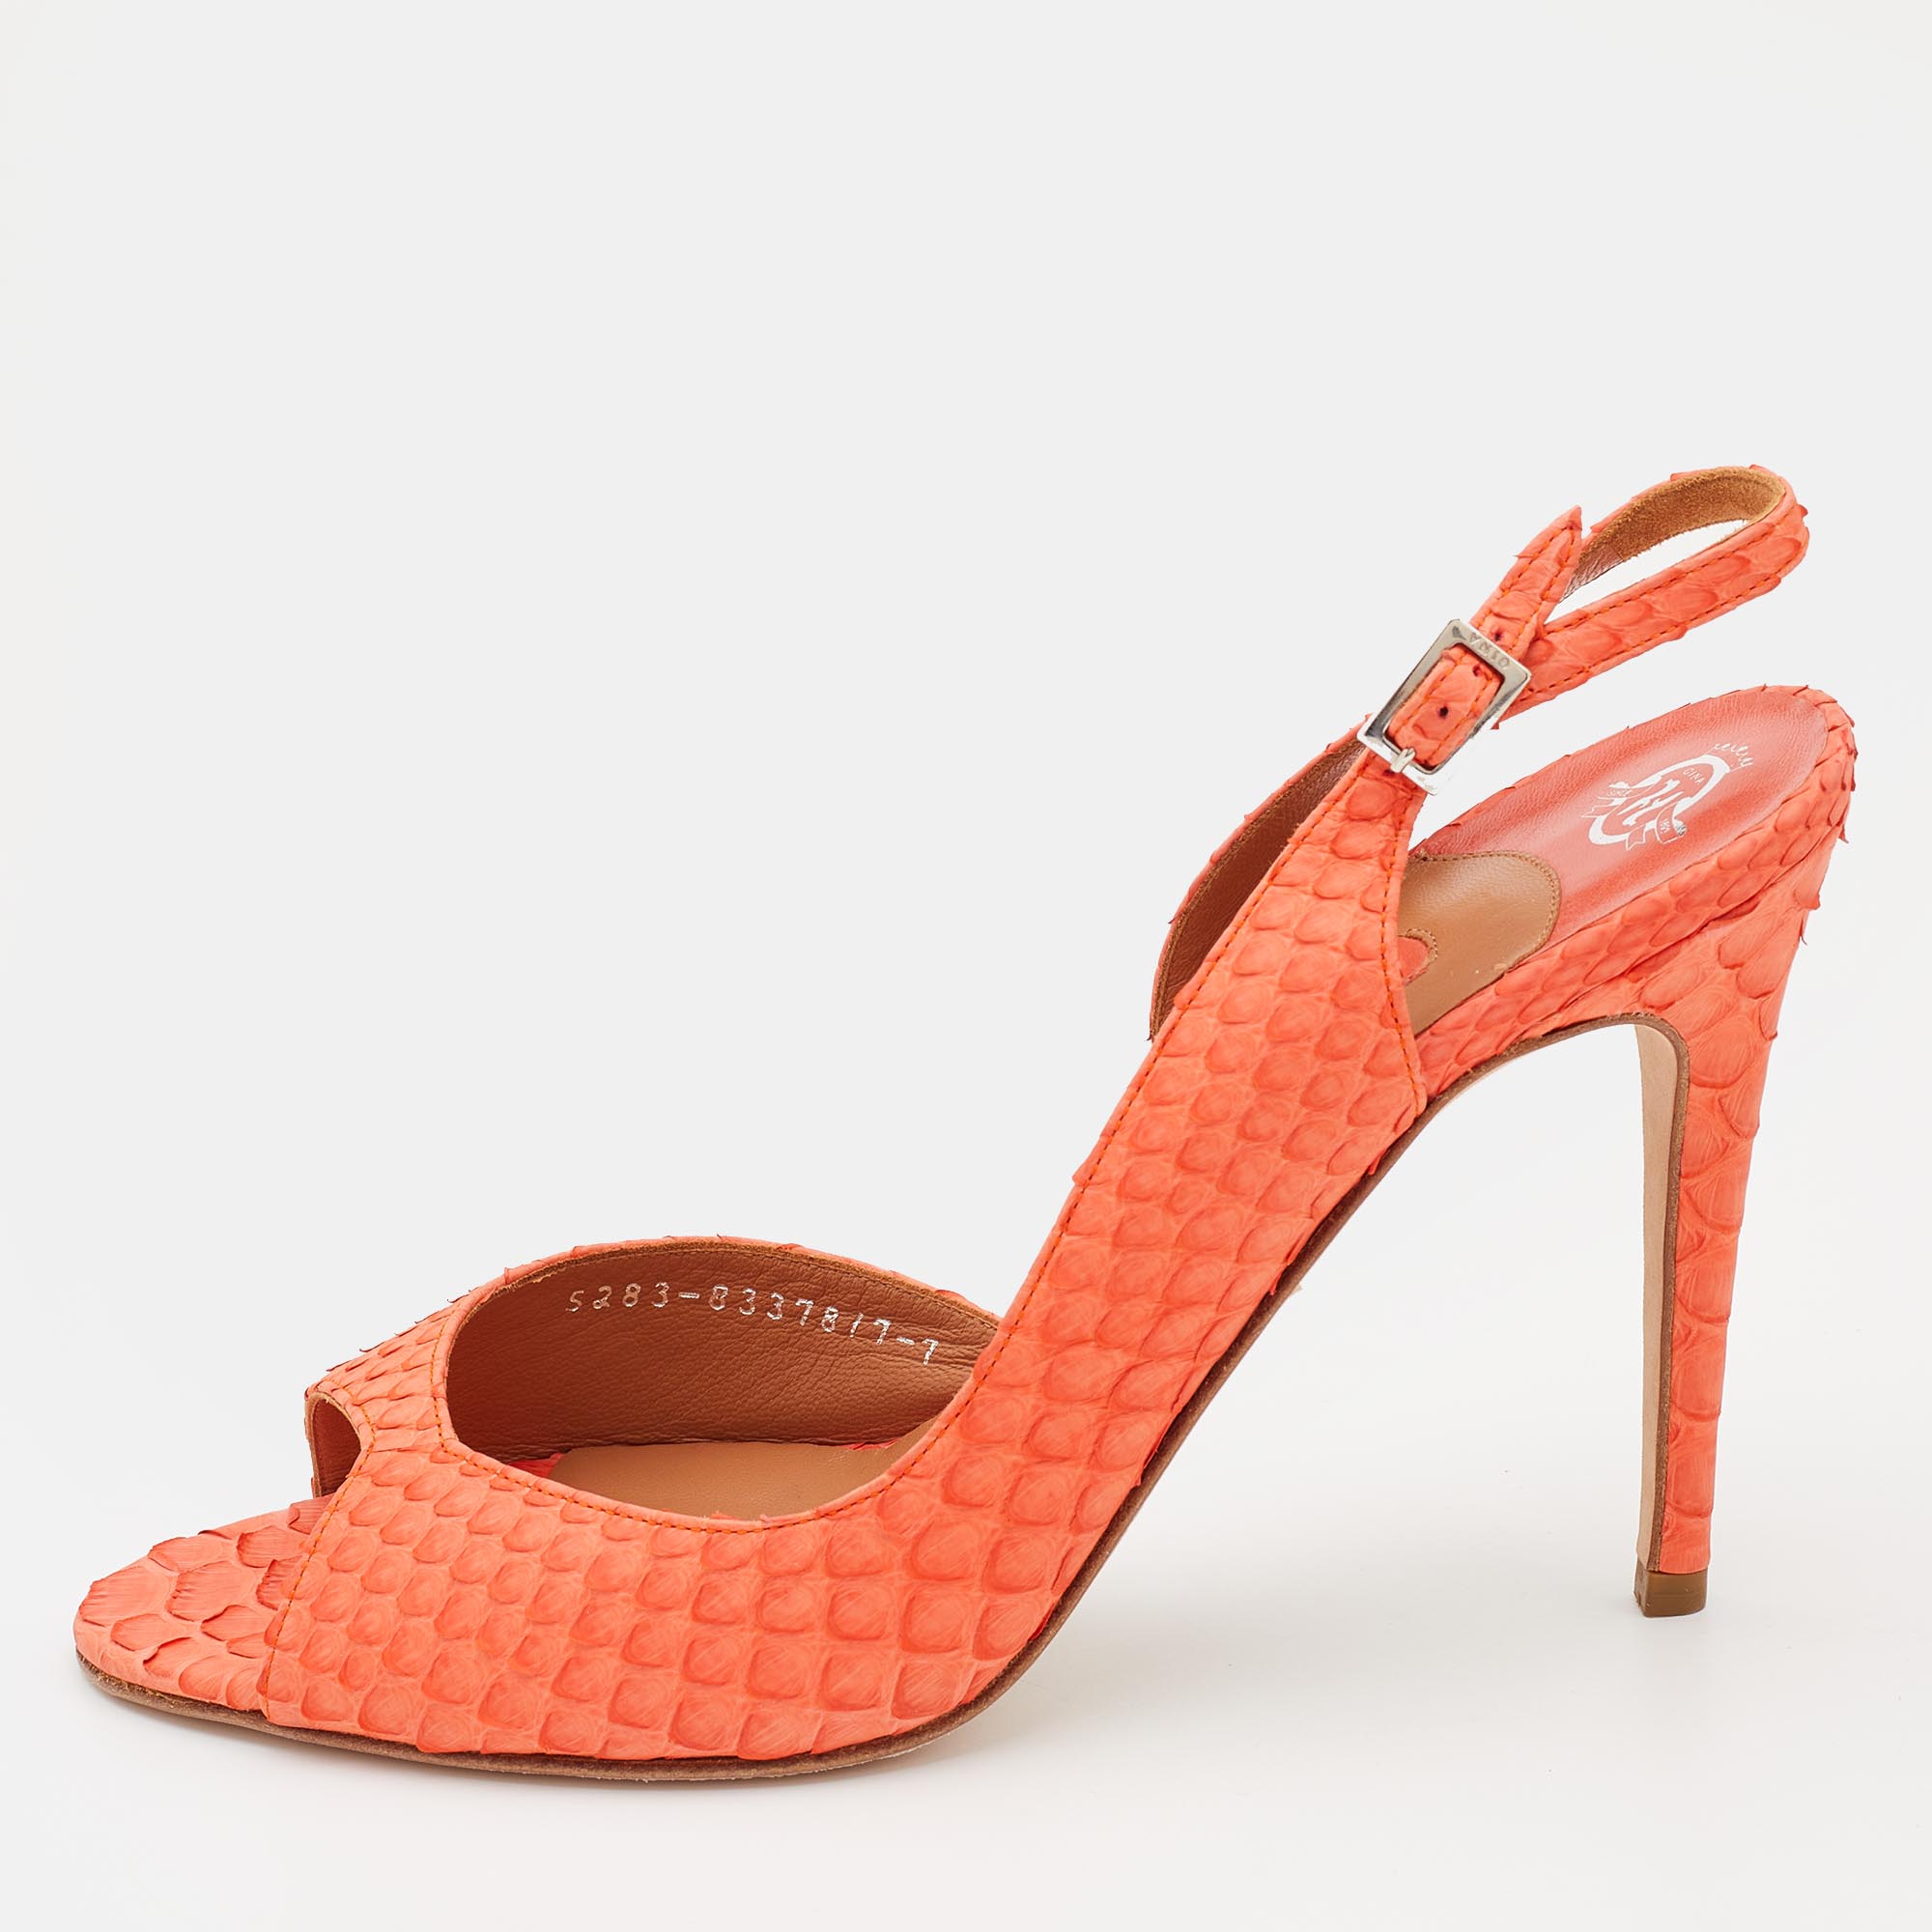 Pre-owned Gina Tangerine Python Peep Toe Ankle Strap Sandals Size 40 In Orange